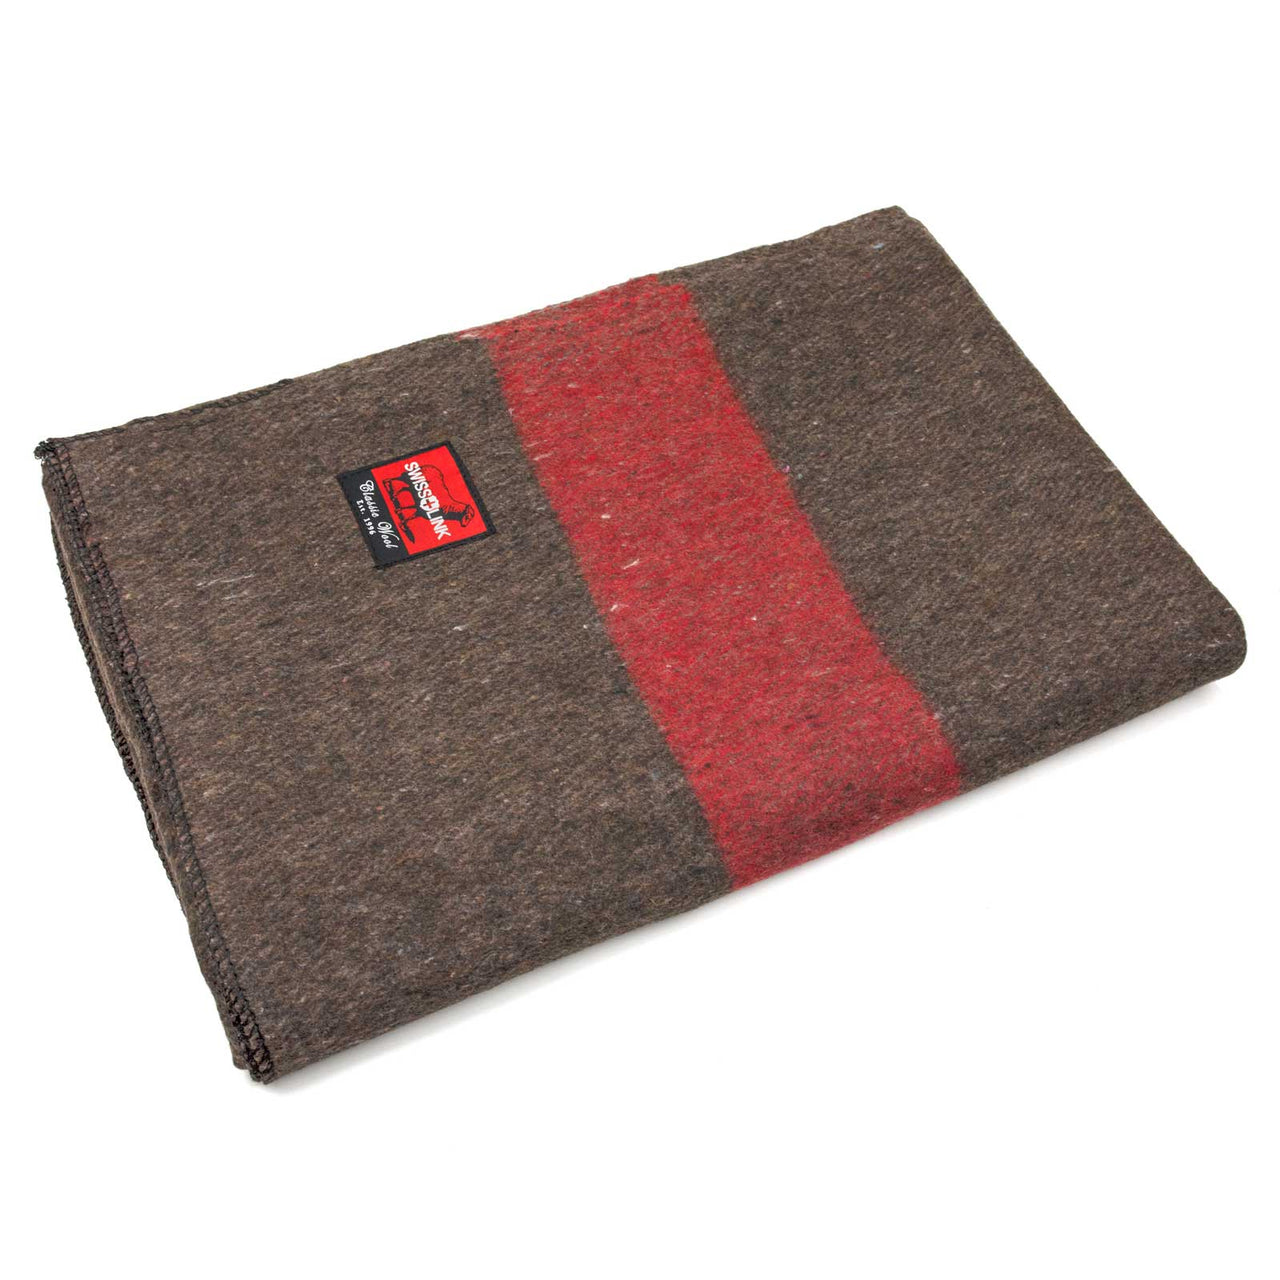 Premium Quality Swiss Army Reproduction 80% Wool Blanket